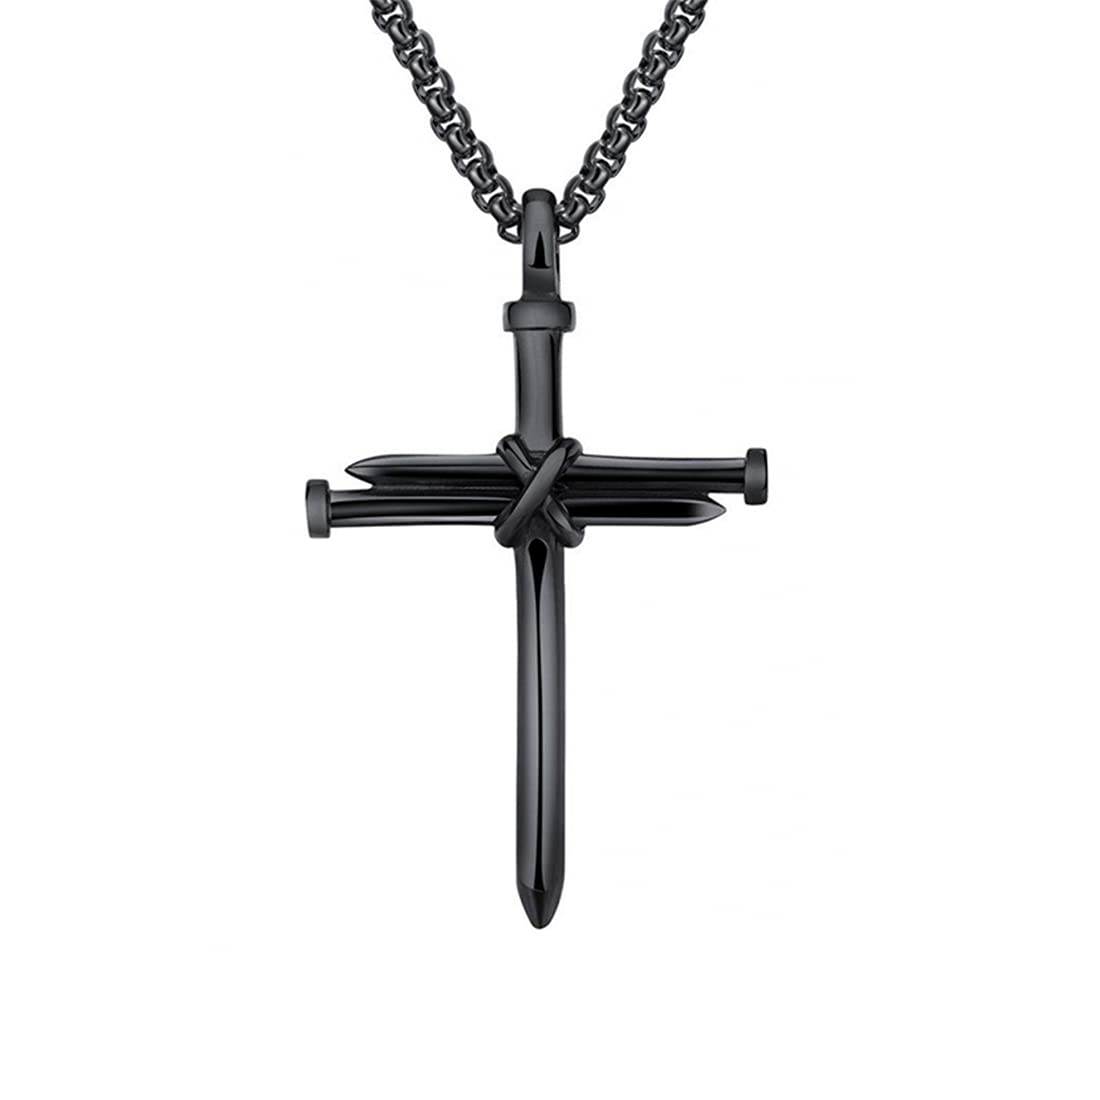 Yellow Chimes Pendant for Men and Boys Black Pendants For Men | Stainless Steel Nail Cross Pendant Necklace Chain for Men | Birthday Gift for Men and Boys Anniversary Gift for Husband